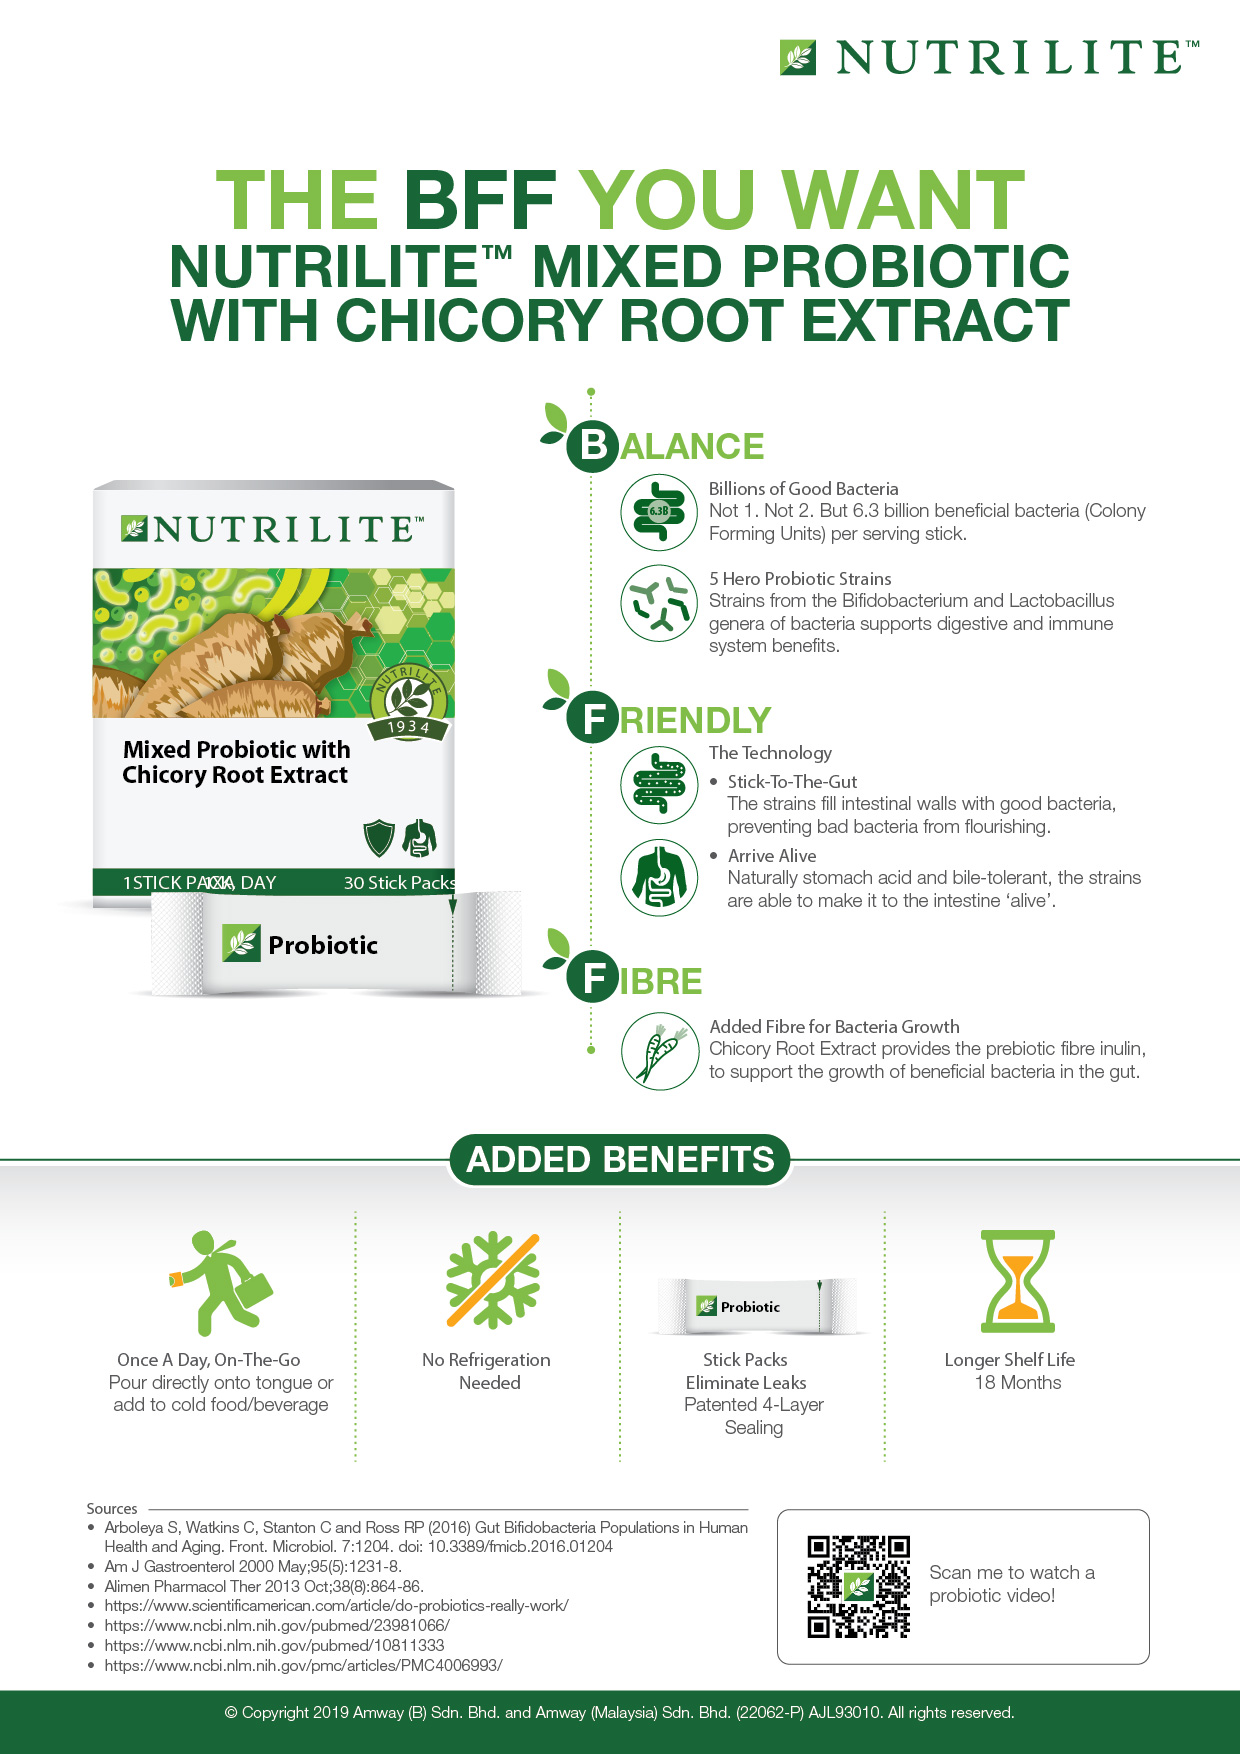 Nutrilite Mixed Probiotic With Chicory Root Extract